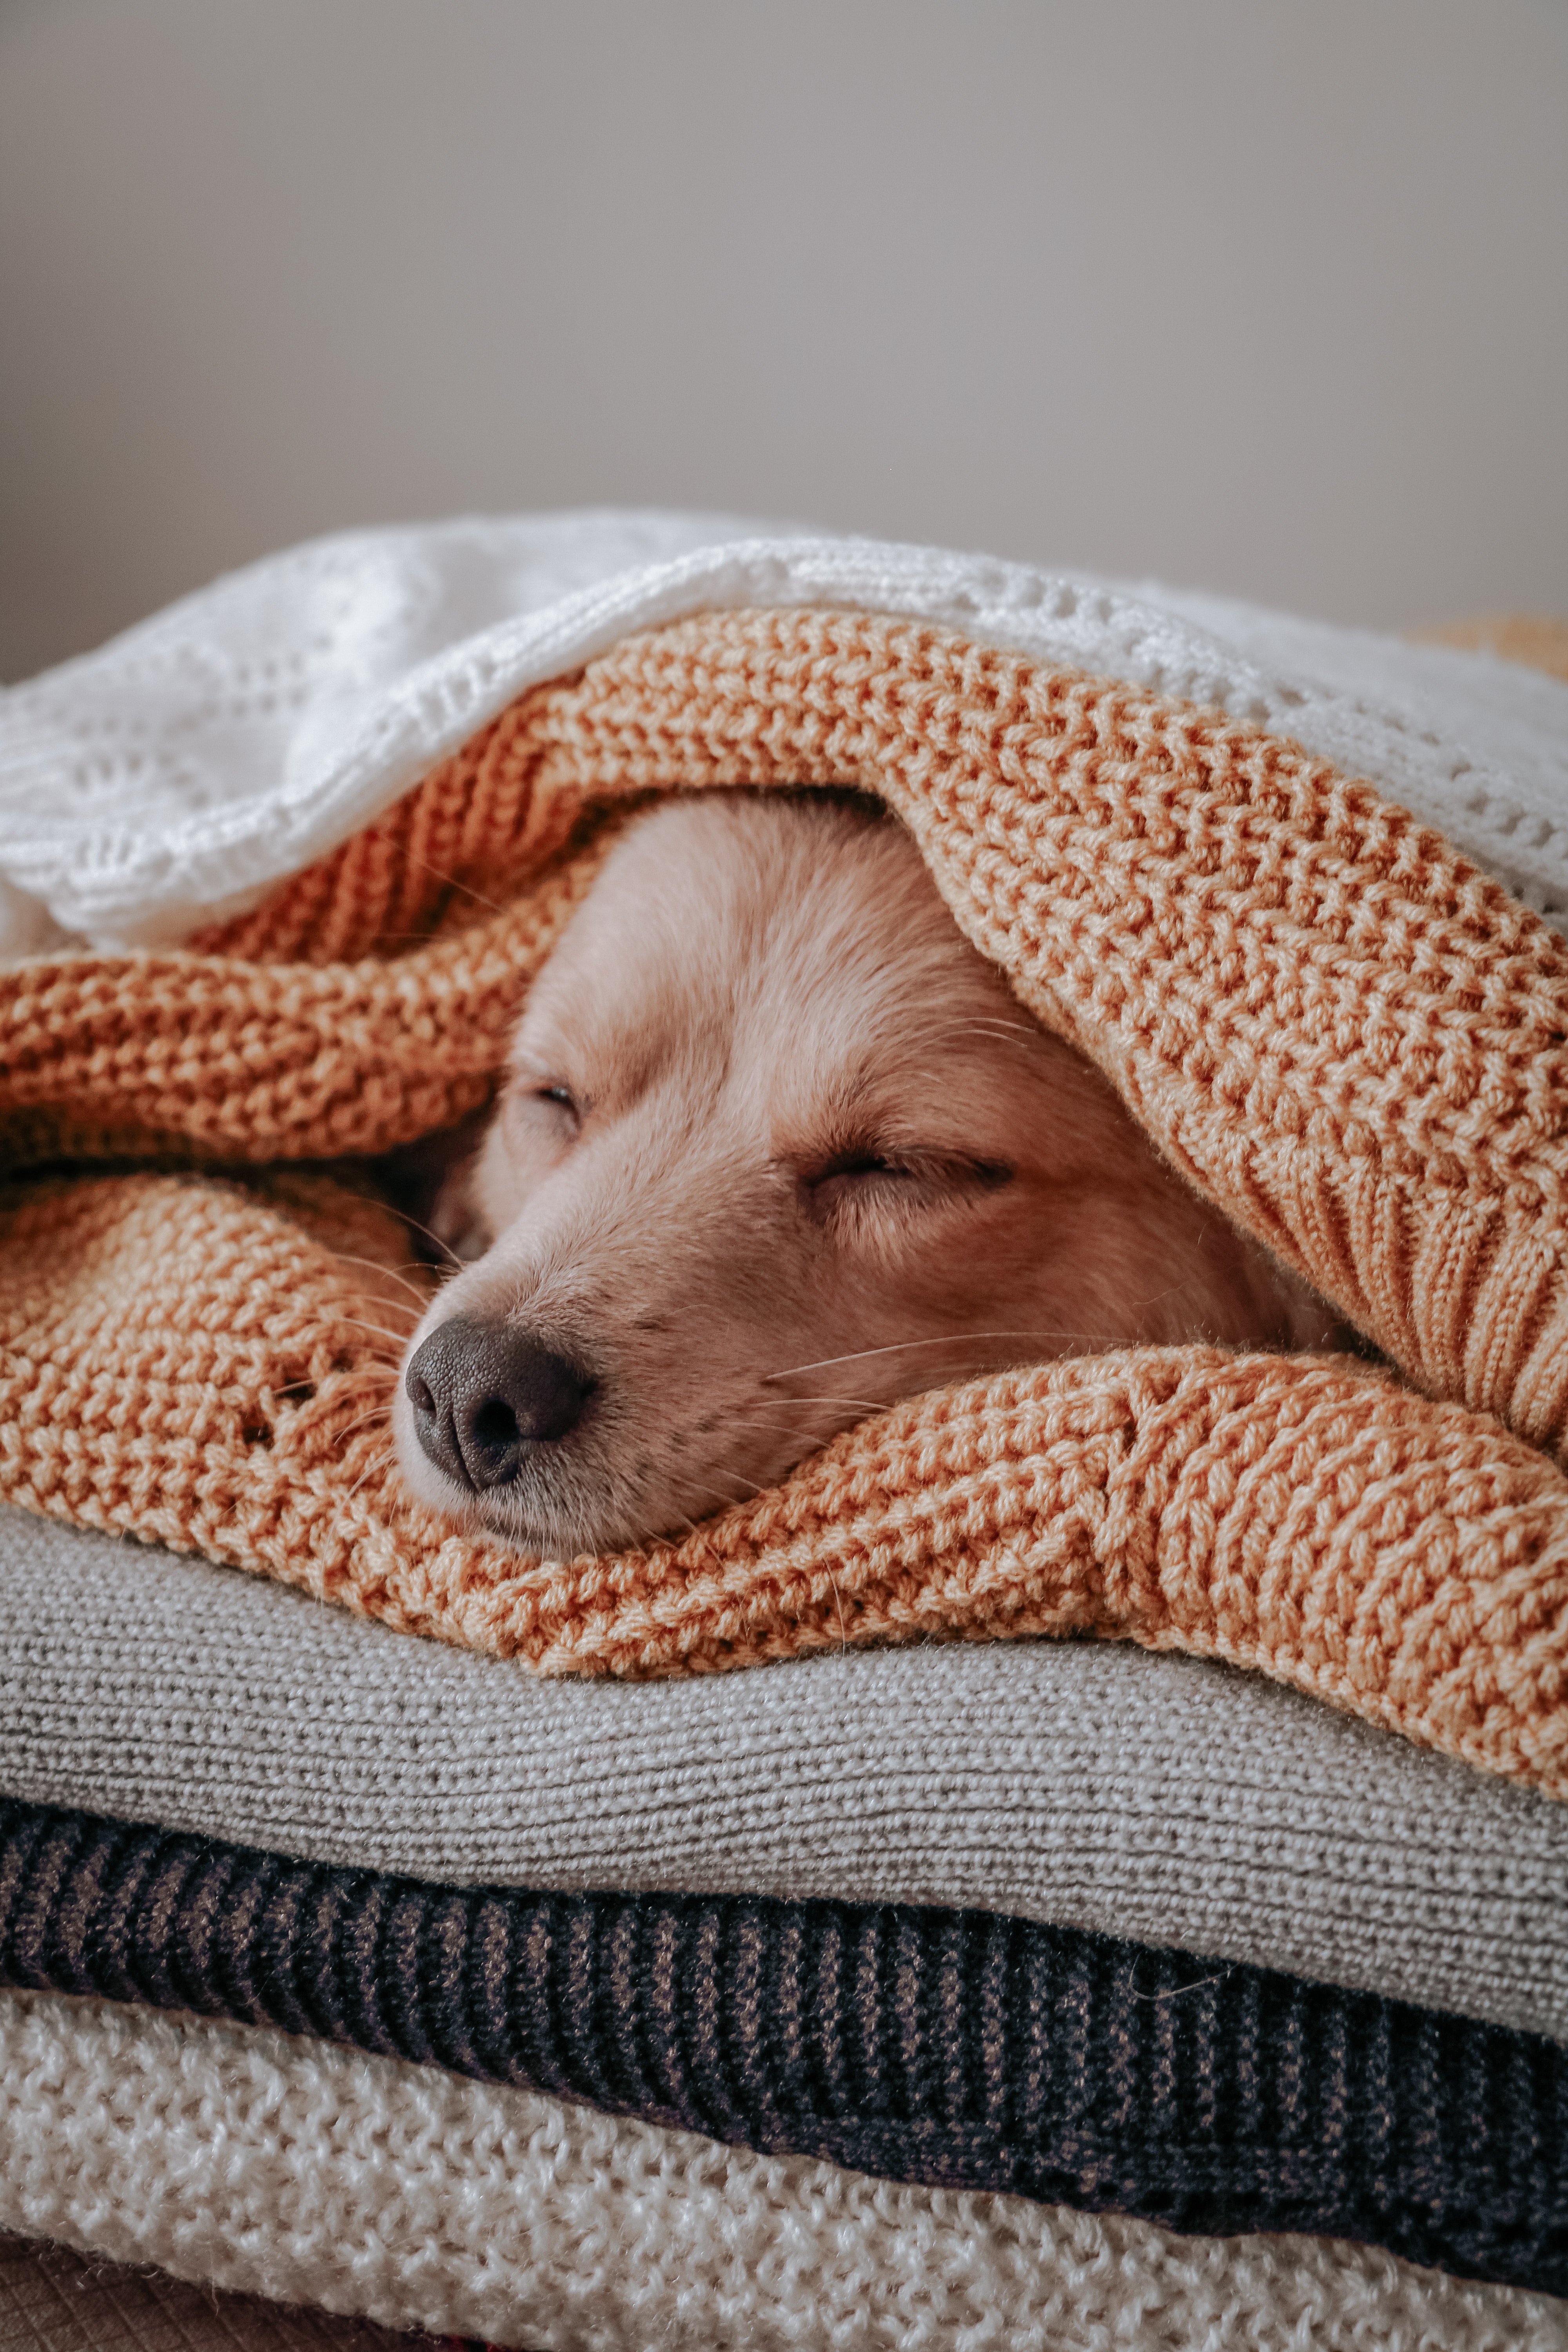 Dog with eyes closed resting in the middle of a stack of sweaters.